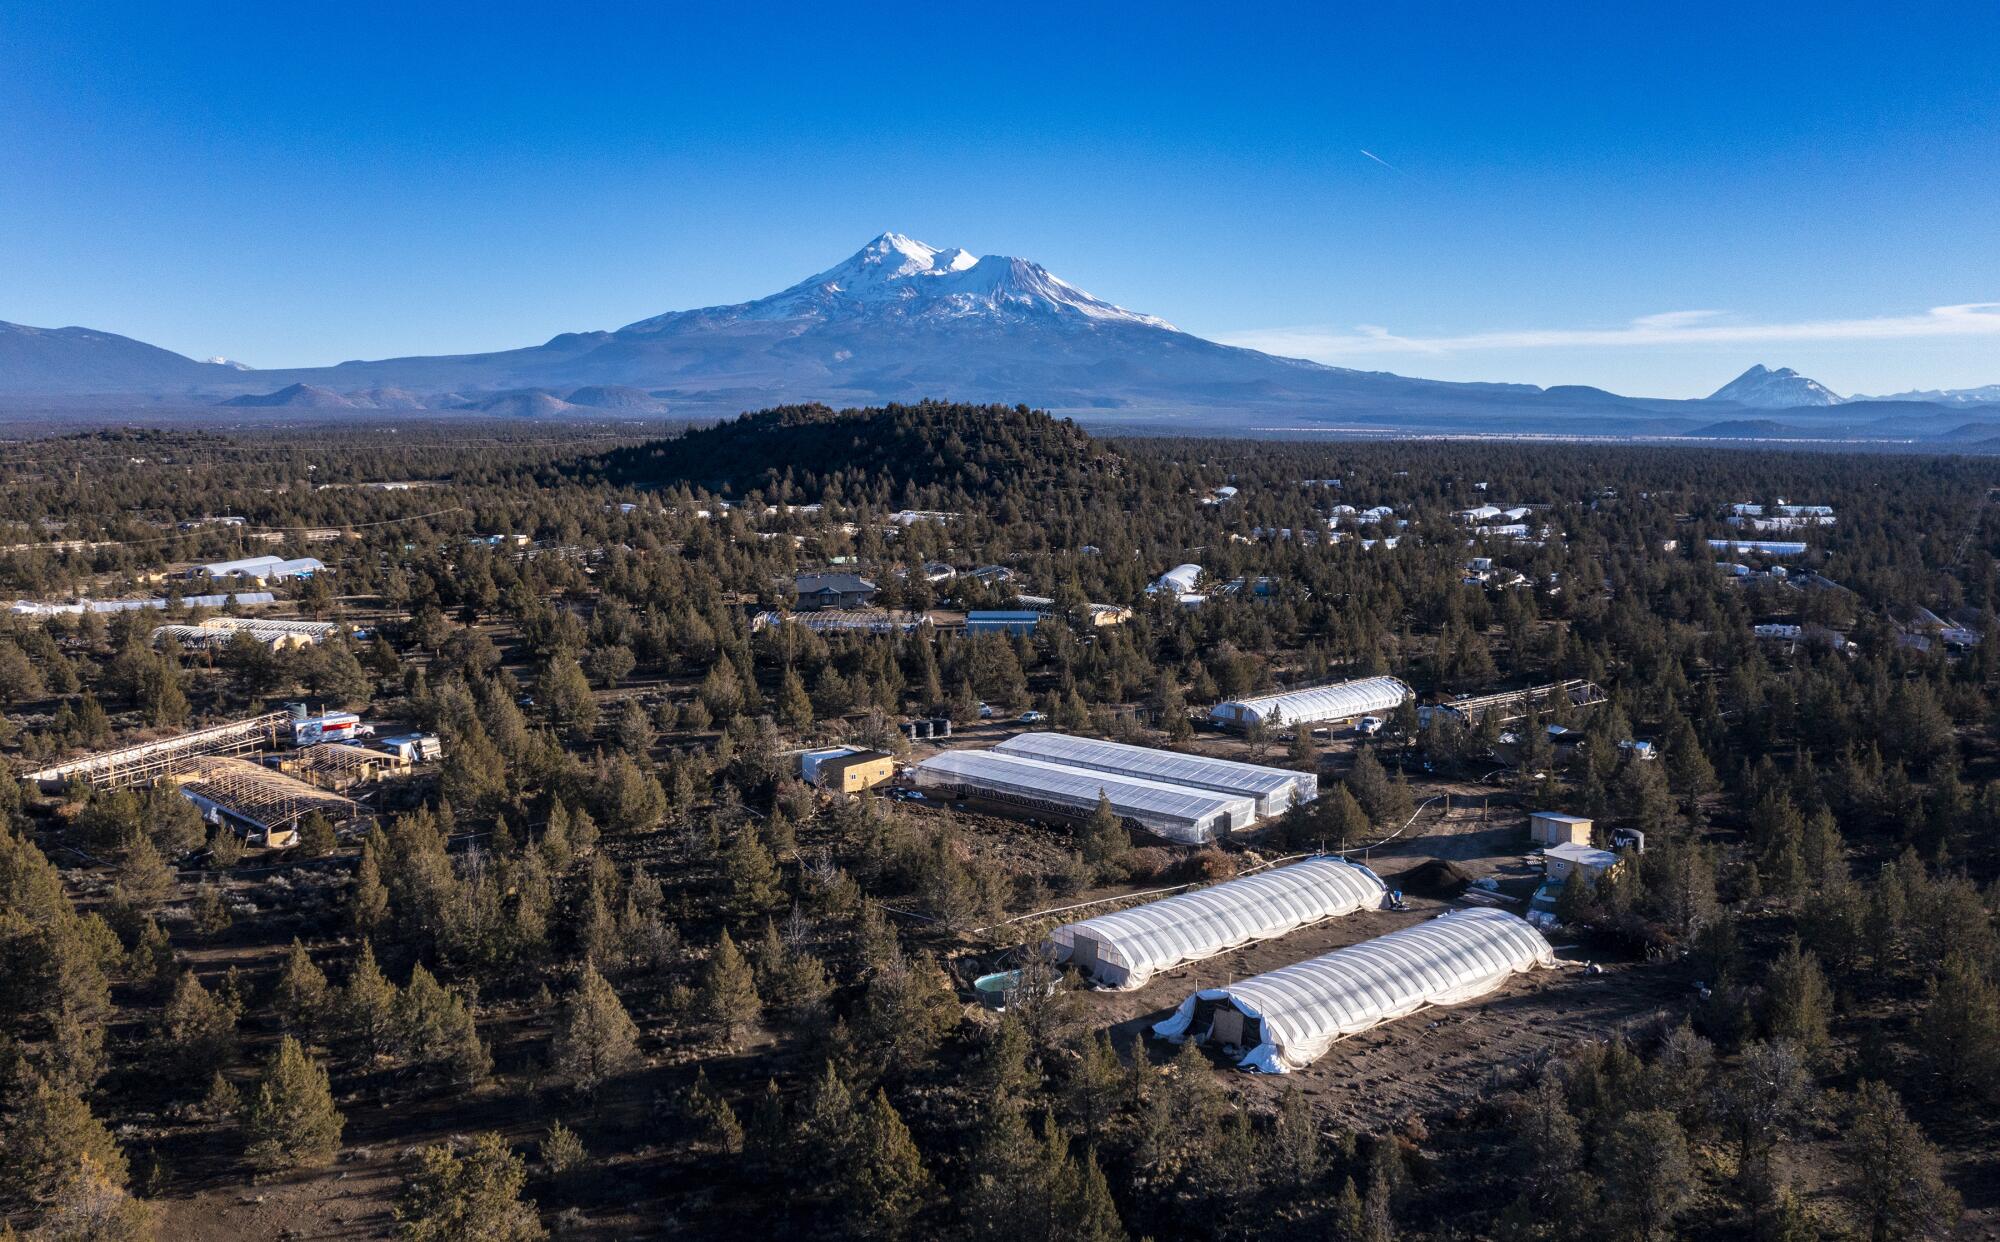 Illicit greenhouses fill the valley of Juniper Flat in the shadow of Mt. Shasta.